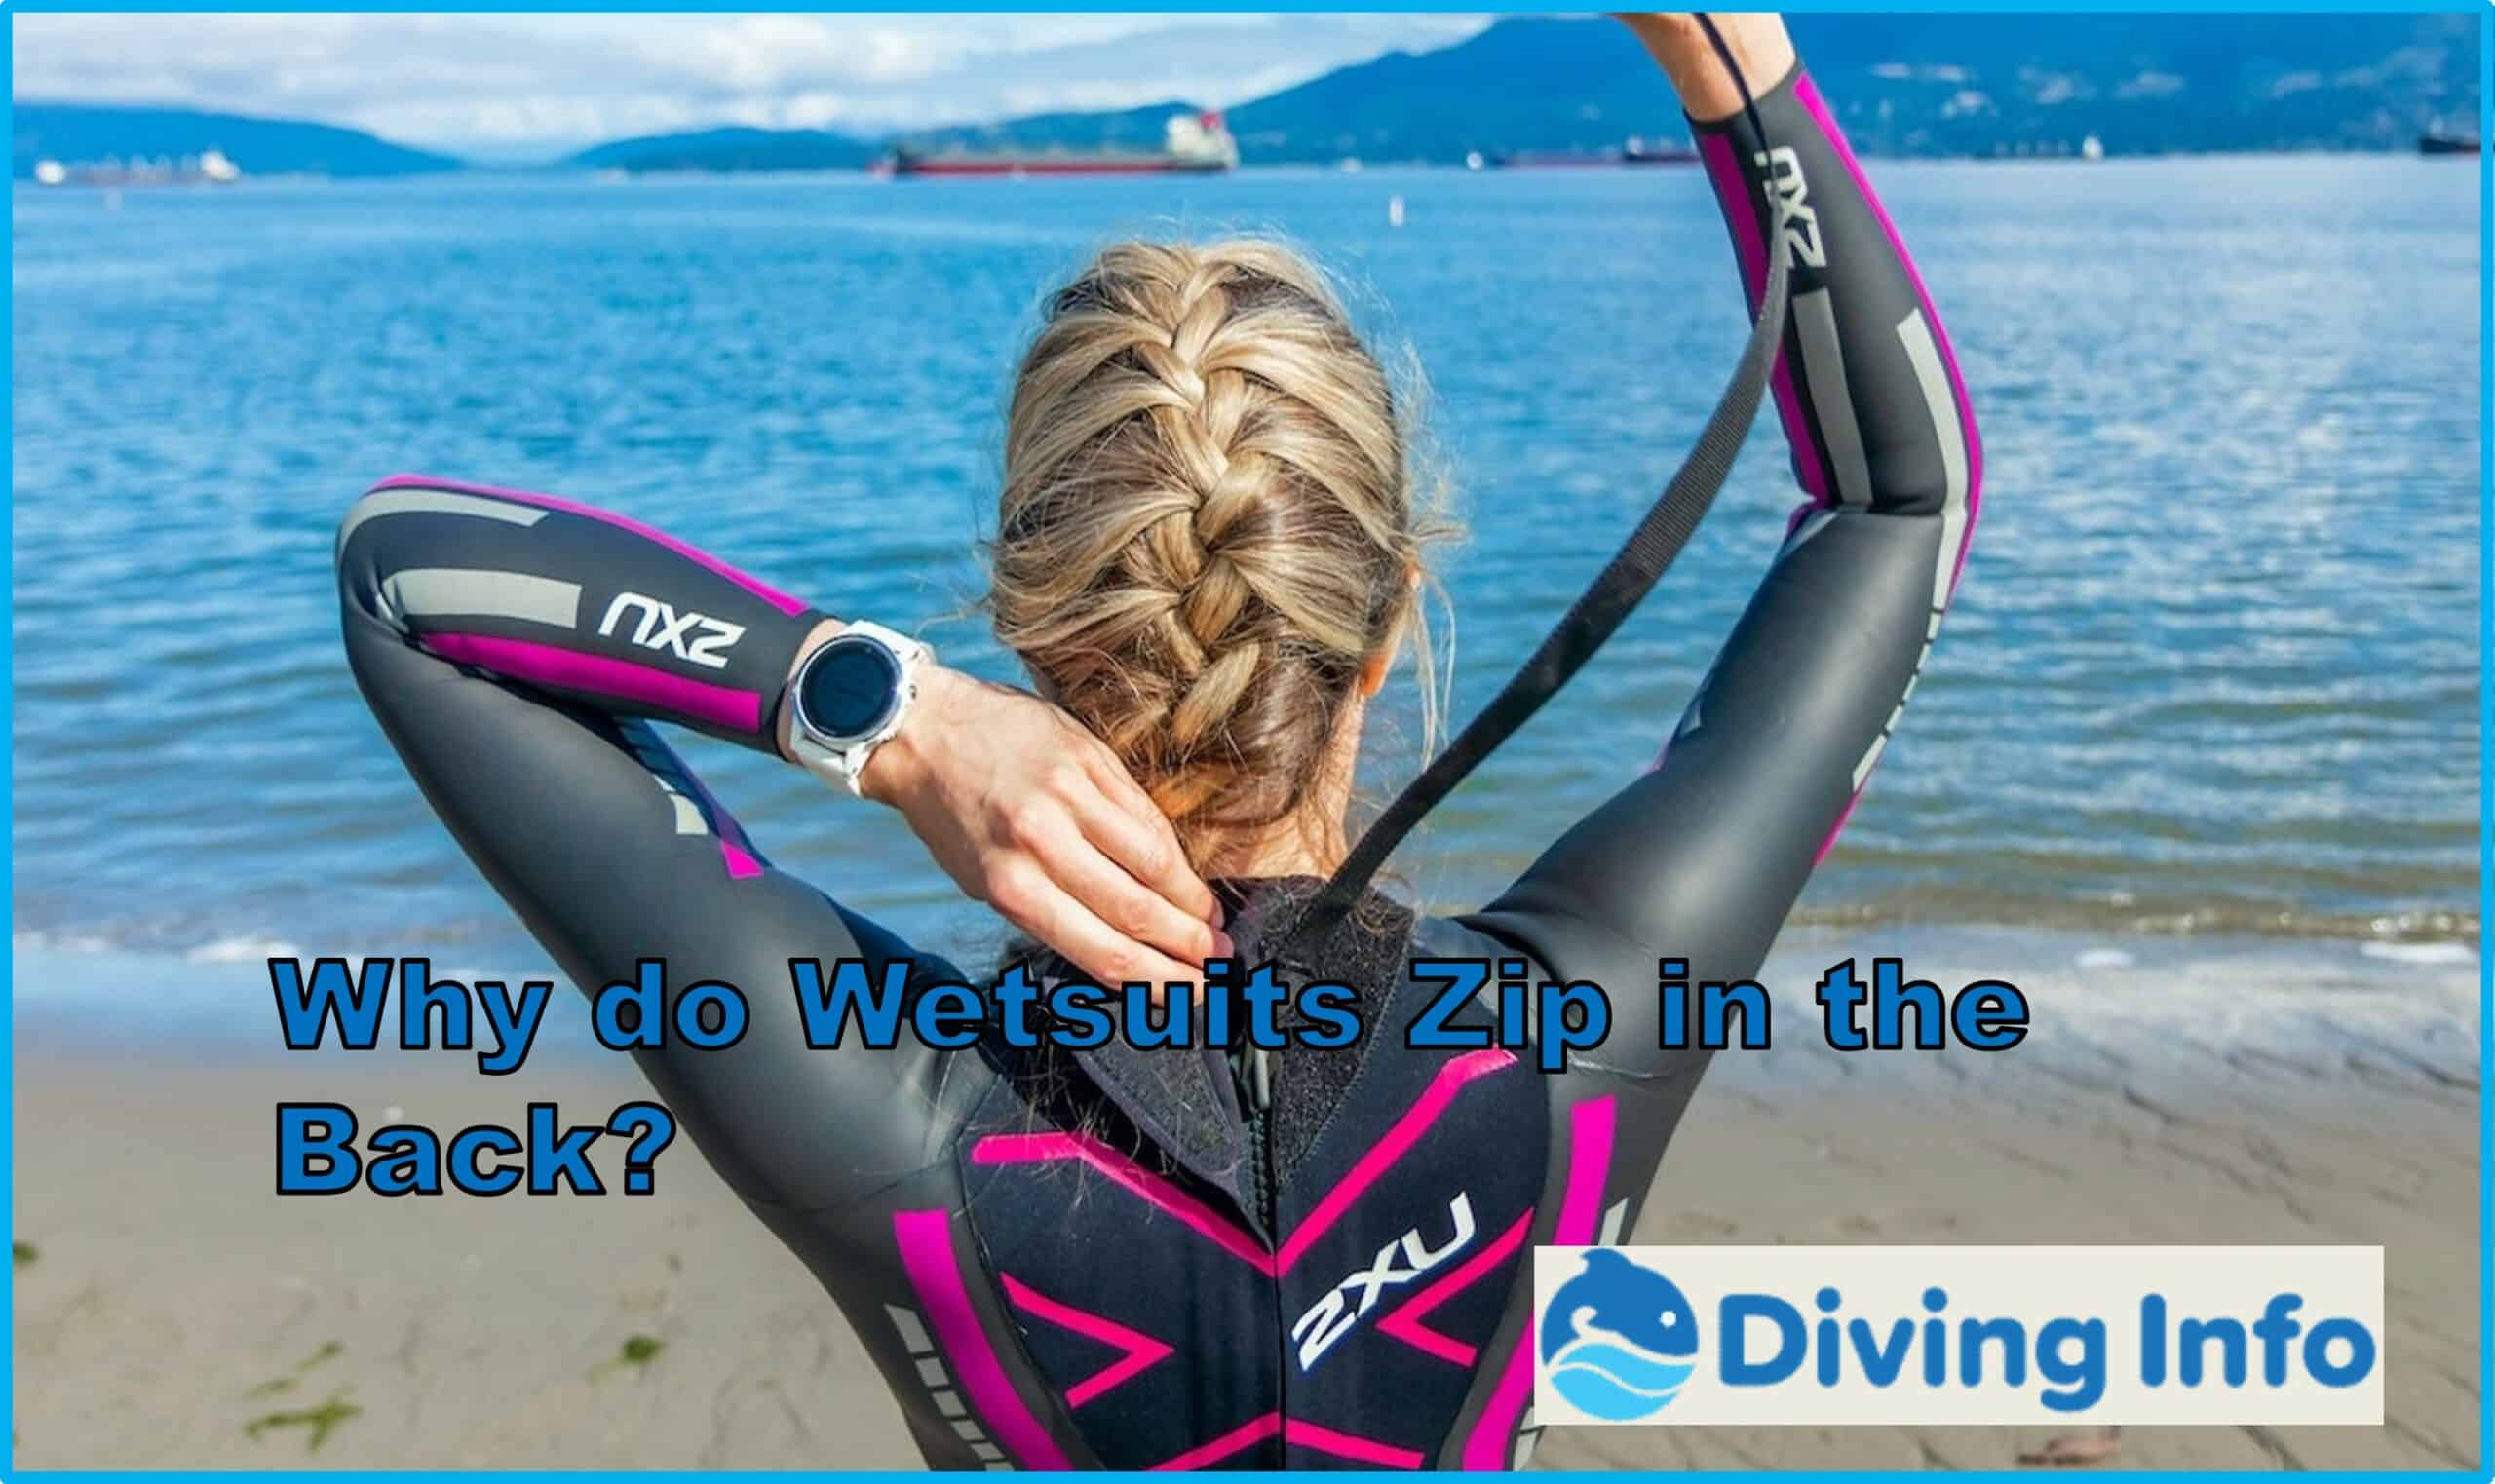 Why do Wetsuits Zip in the Back?